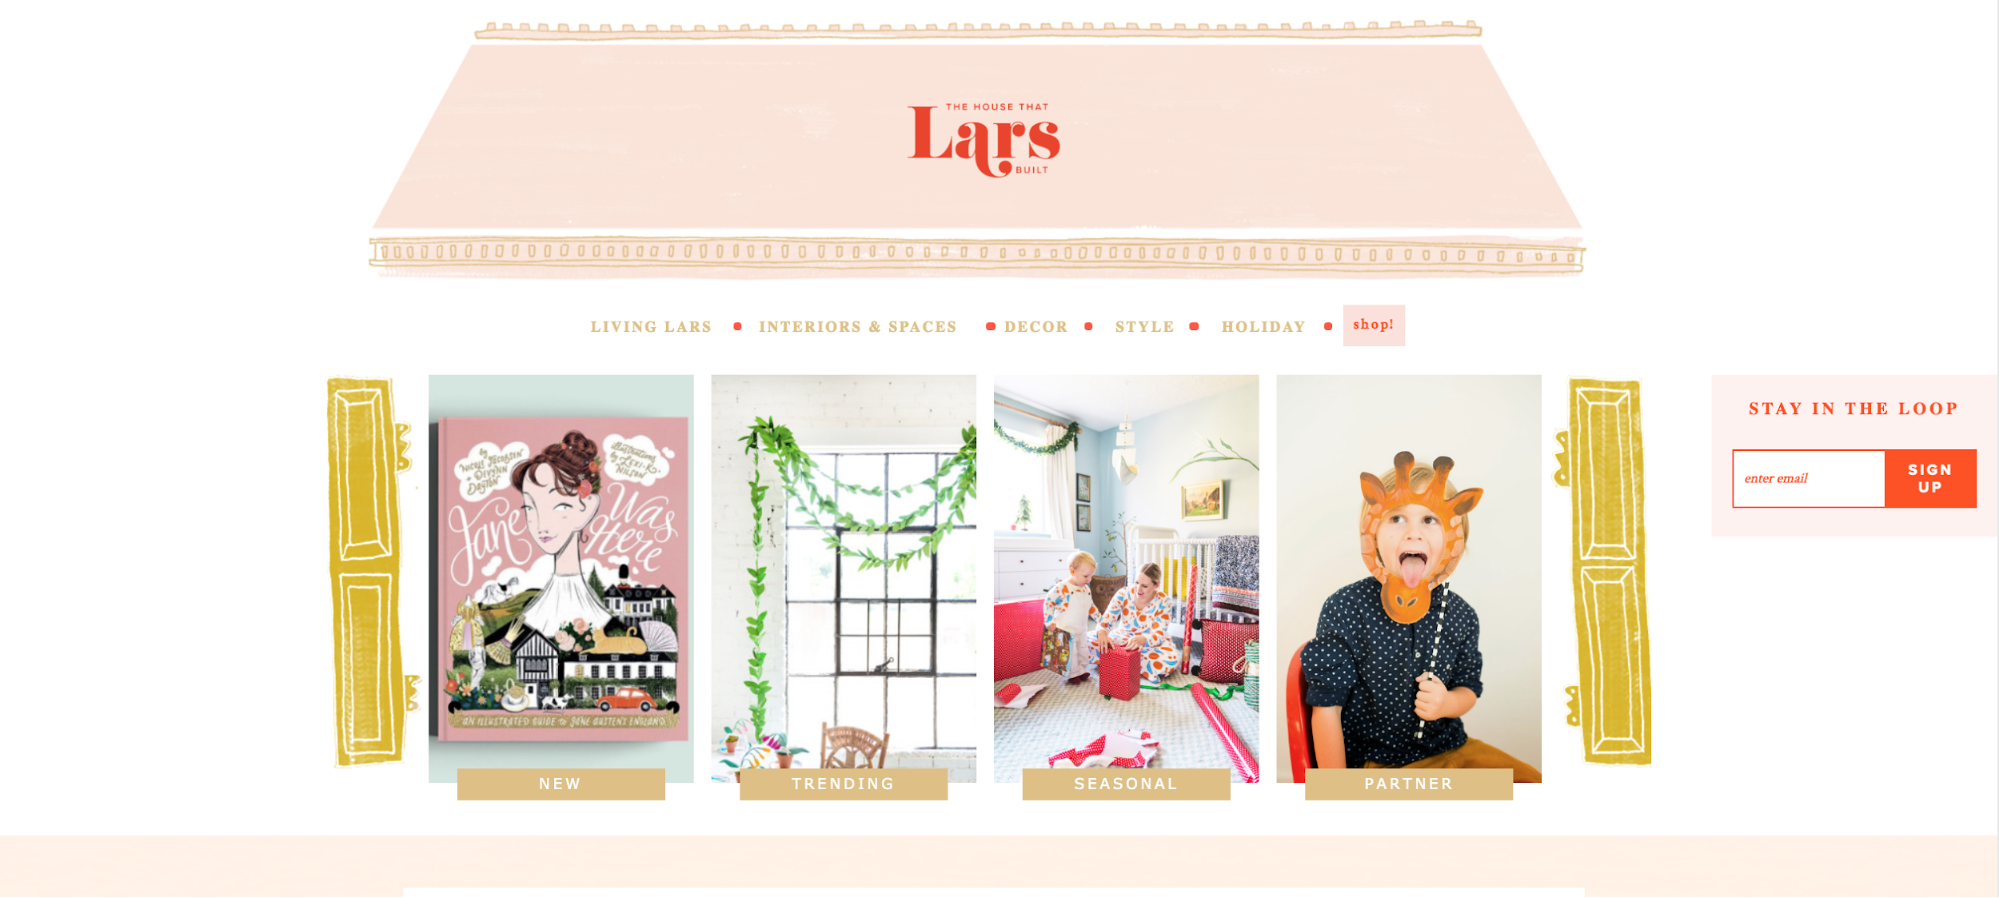 The House Of Lars homepage, with a hero banner shaped like the roof of a house, and illustrations of window panes on either side of the blog post modules